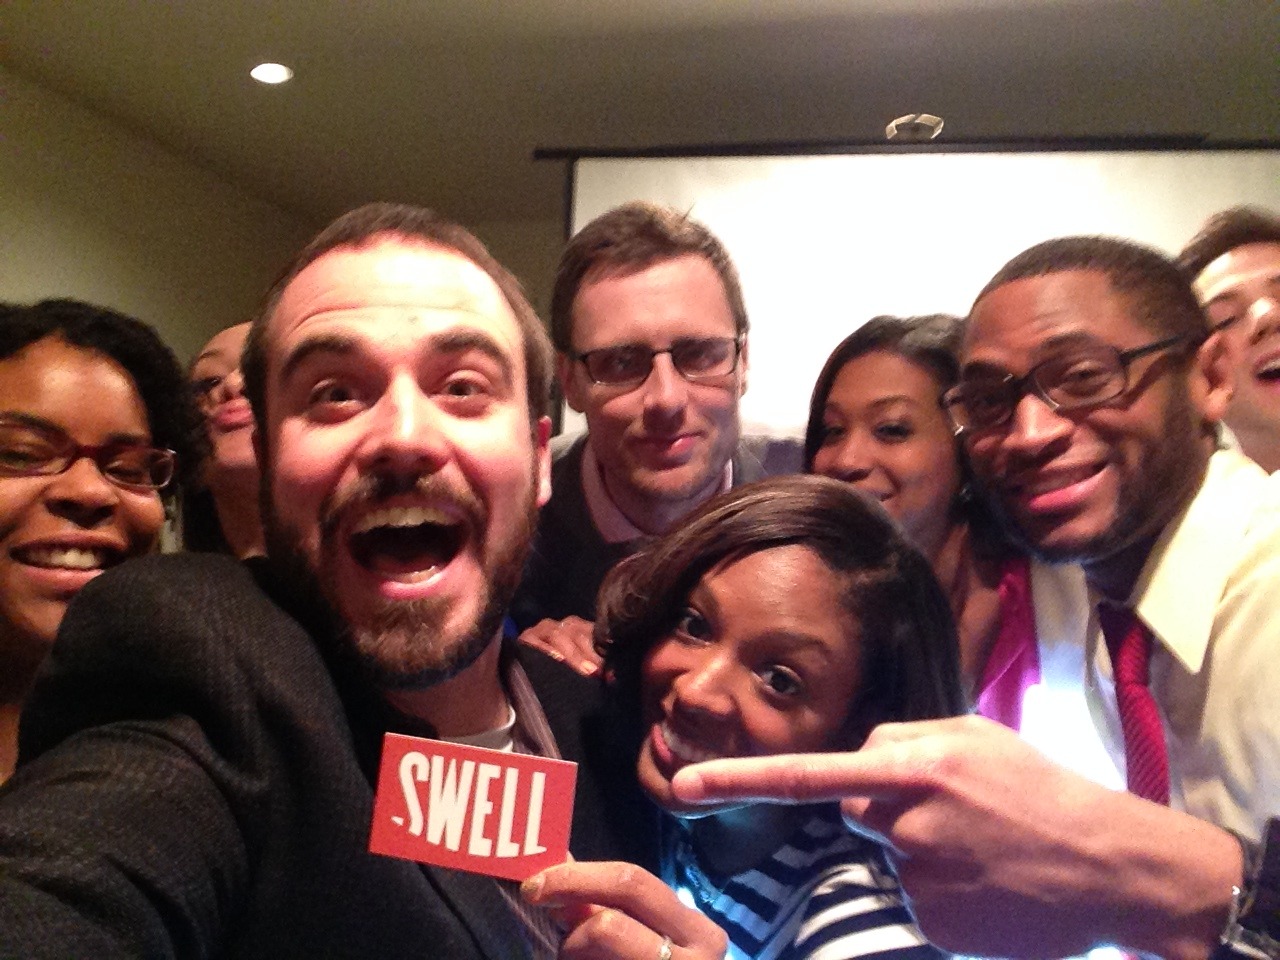 #SWELLfie. Thanks again to New Leaders Council - Philadelphia for a productive session yesterday w/ SWELL’s Principal & Founder, Greg O. Proud to talk biz with some smart, engaged young folks.